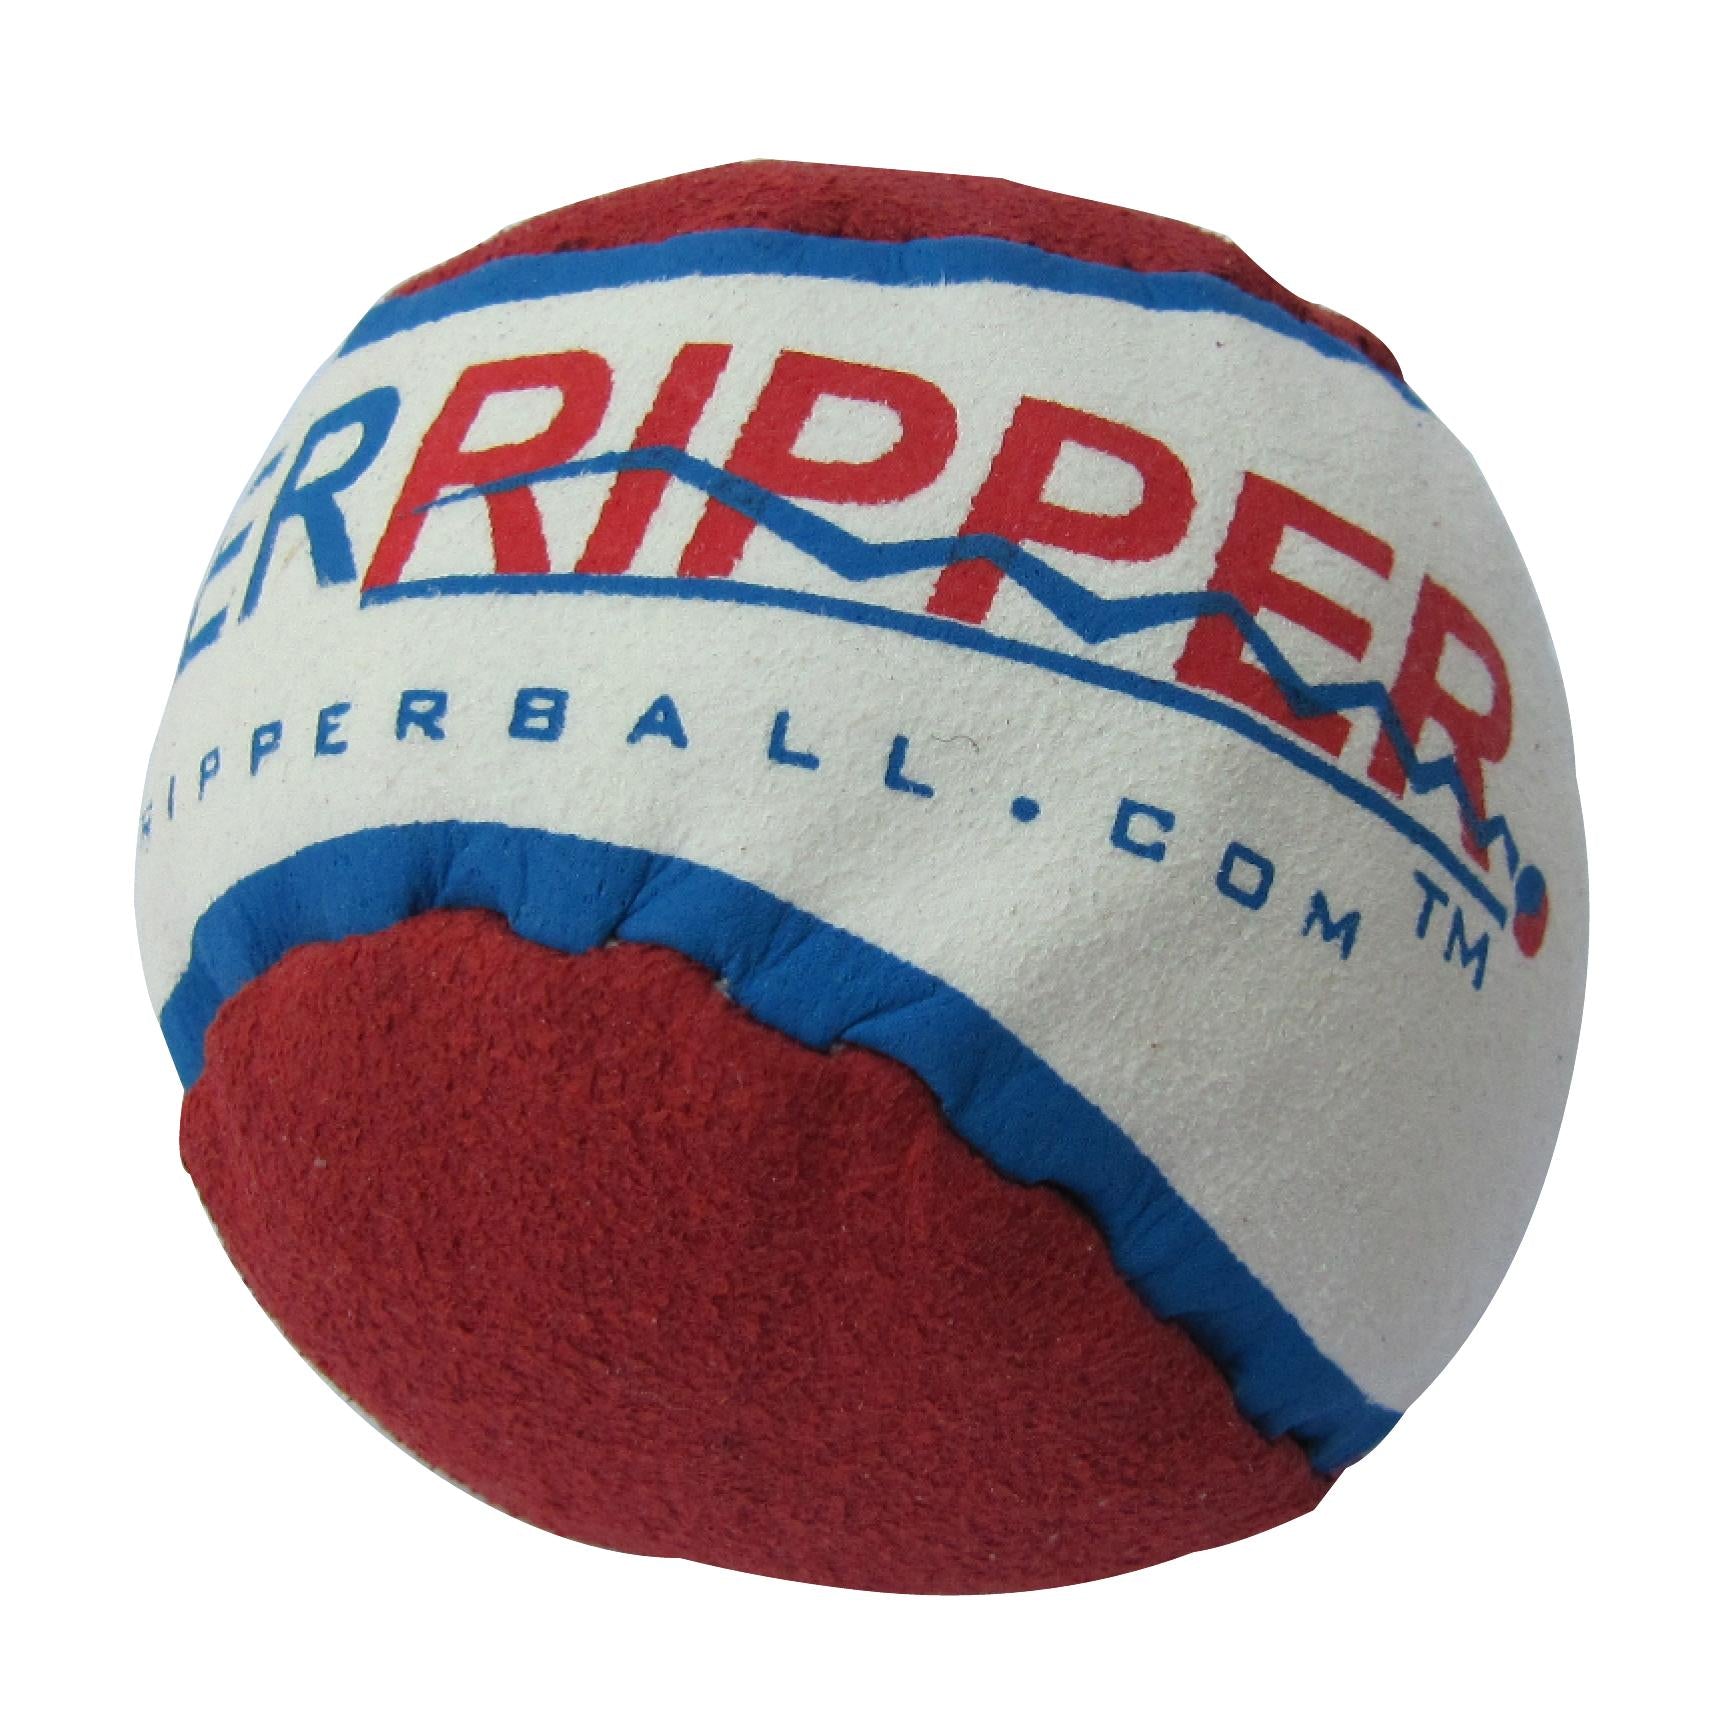 The WaterRipper | A Classic American Water Ball That Skips Like a Rock but You Catch It Like a Bag! Patented Safer, Water Absorbing, Low-Profile Water Ball That Doesn’t Hurt!